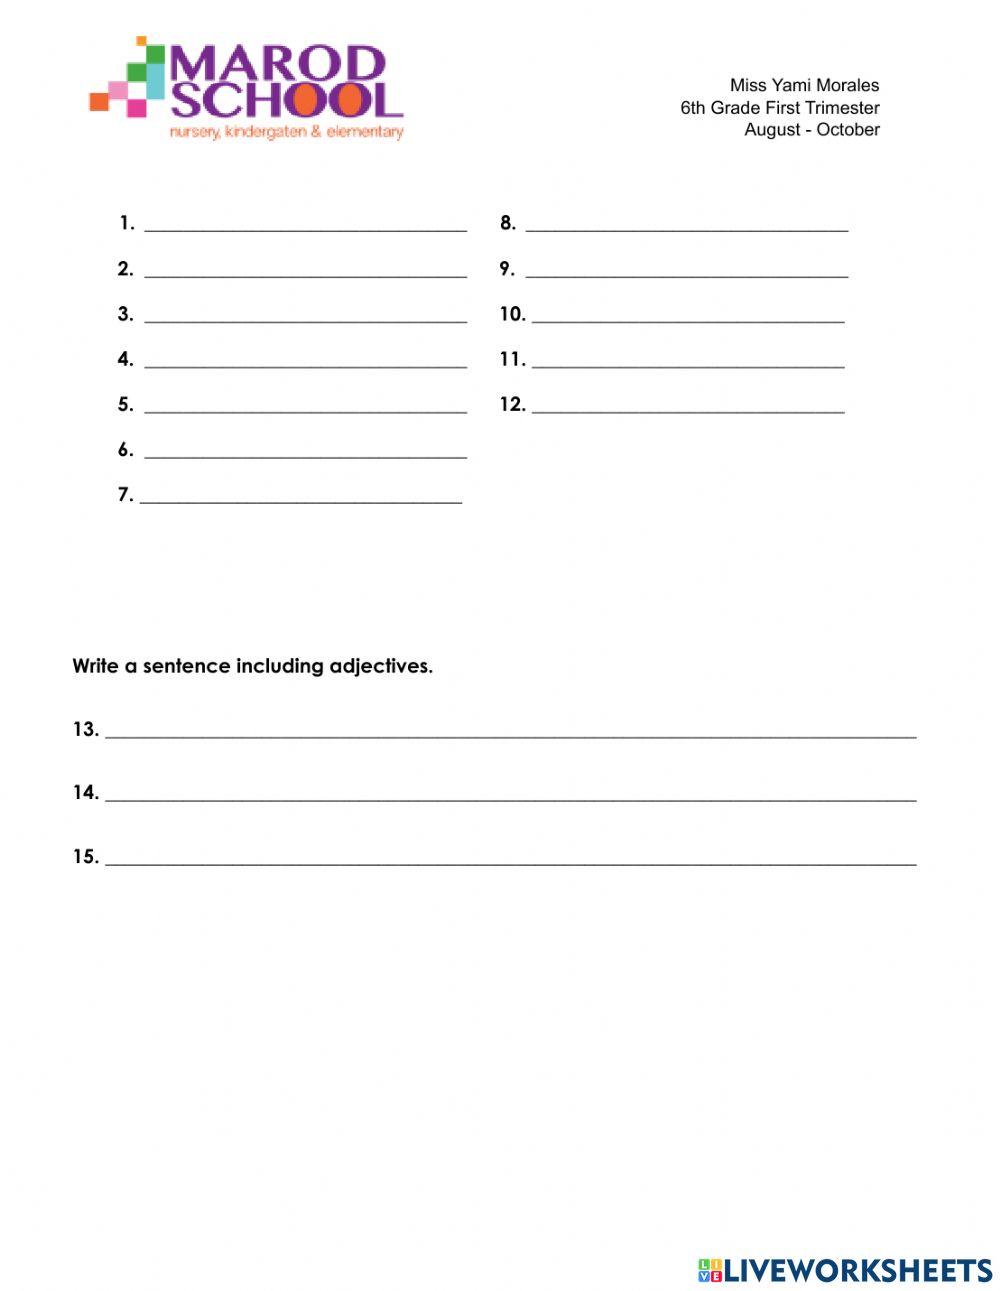 Reading and Writing-Spelling Exam